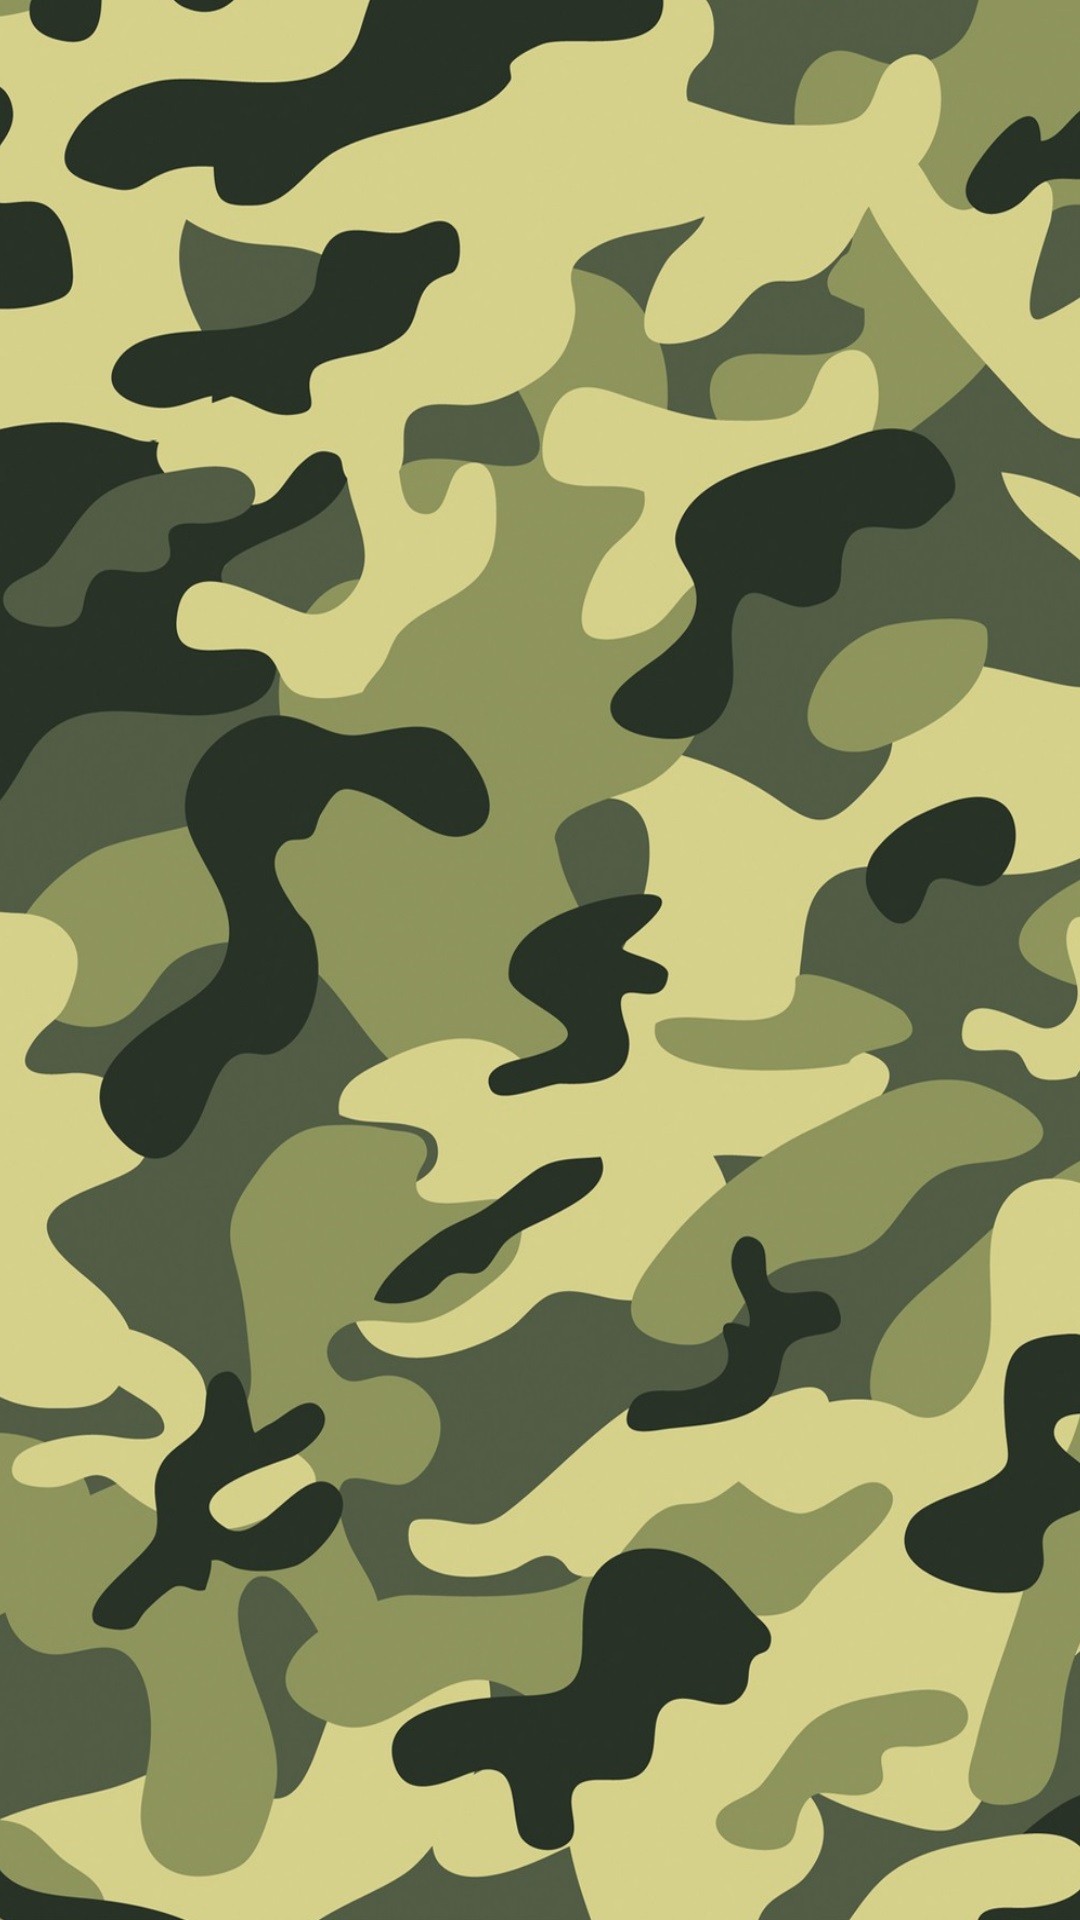 camouflage wallpaper,military camouflage,camouflage,pattern,green,uniform